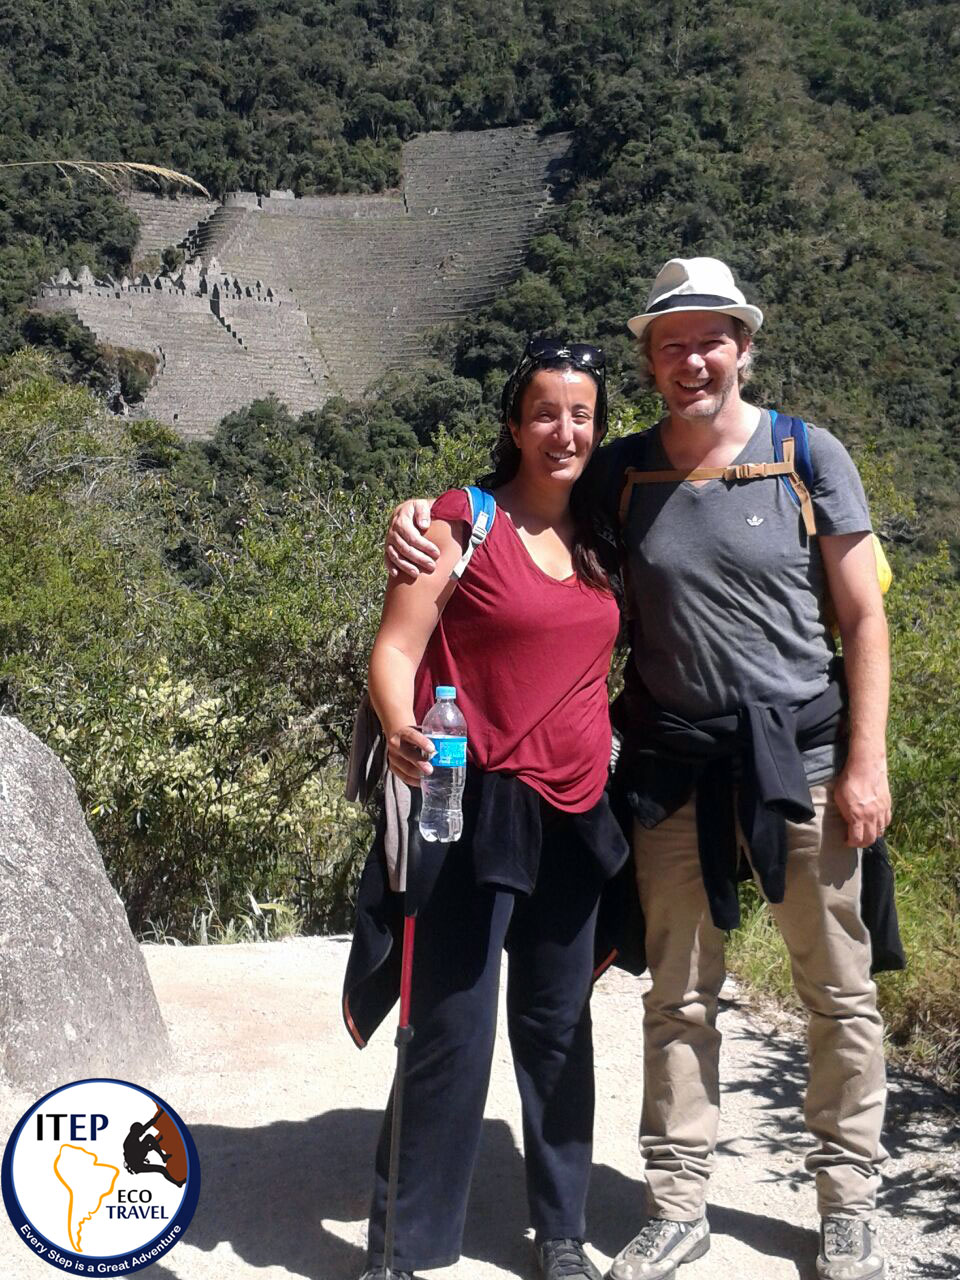 The two day Inca Trail to Machu Picchu - The two day Inca Trail to Machu Picchu